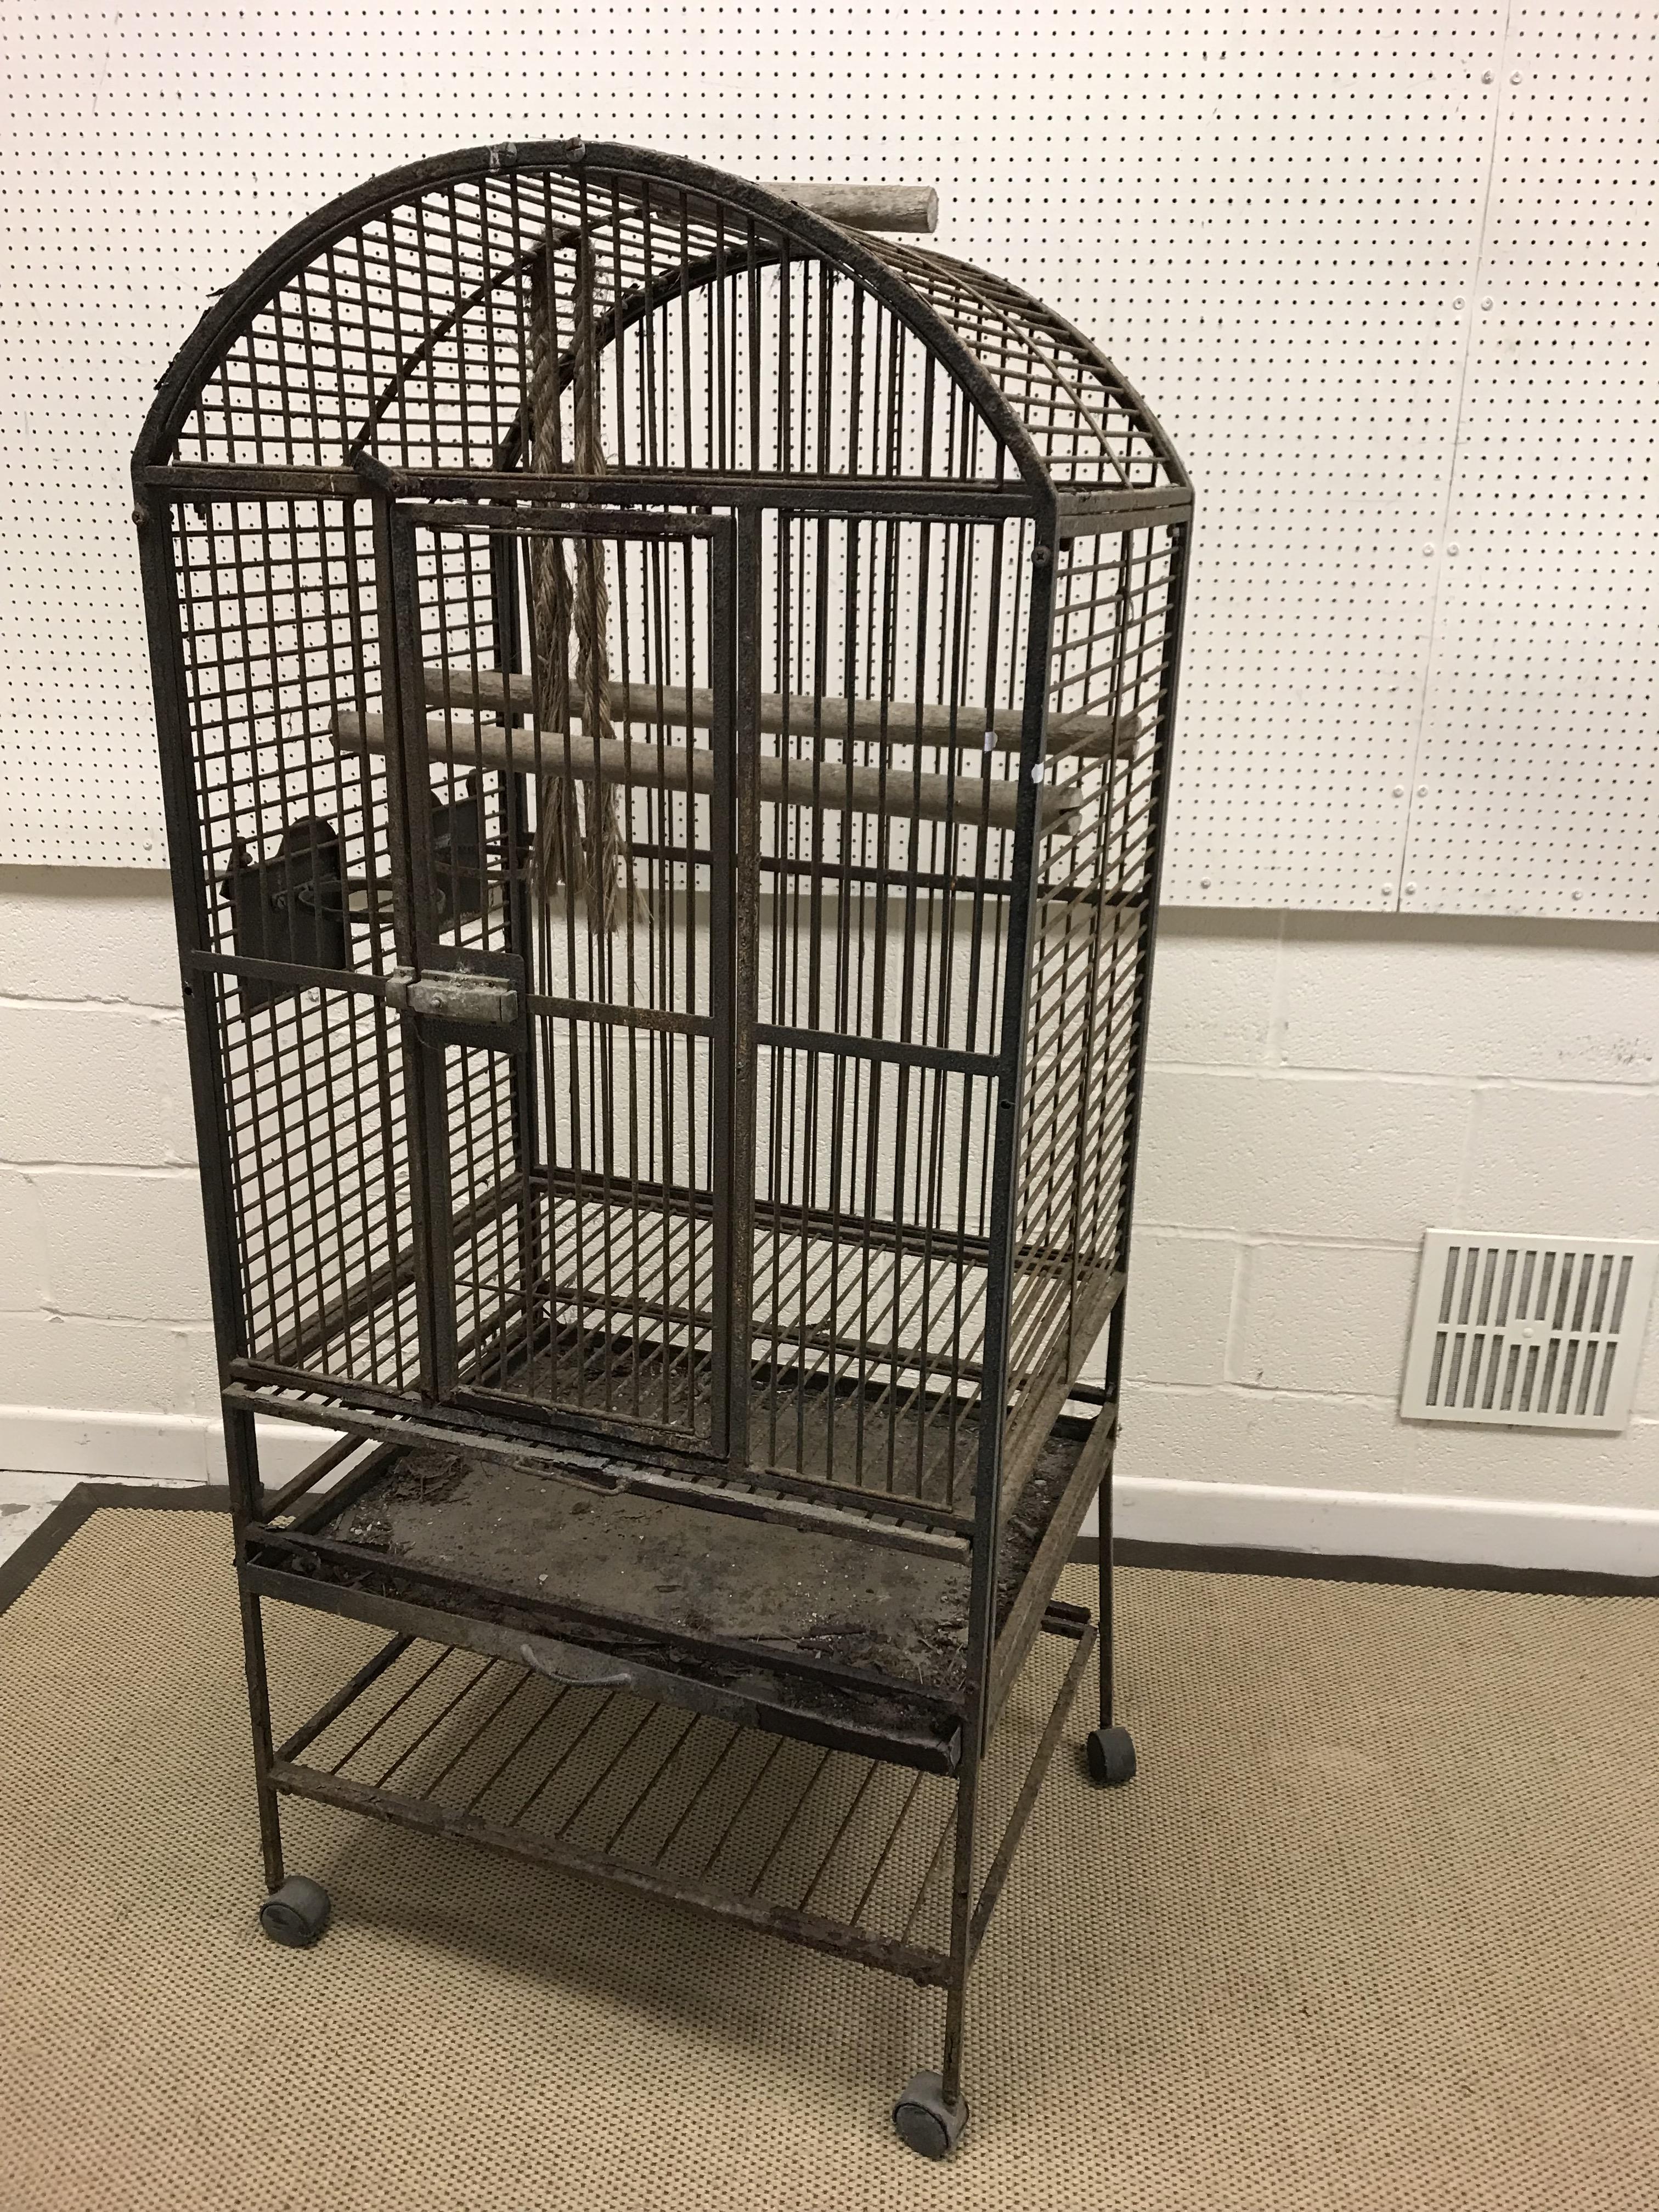 A vintage wrought iron parrot cage with wooden rails and bowl holders, 70.5 cm x 56.